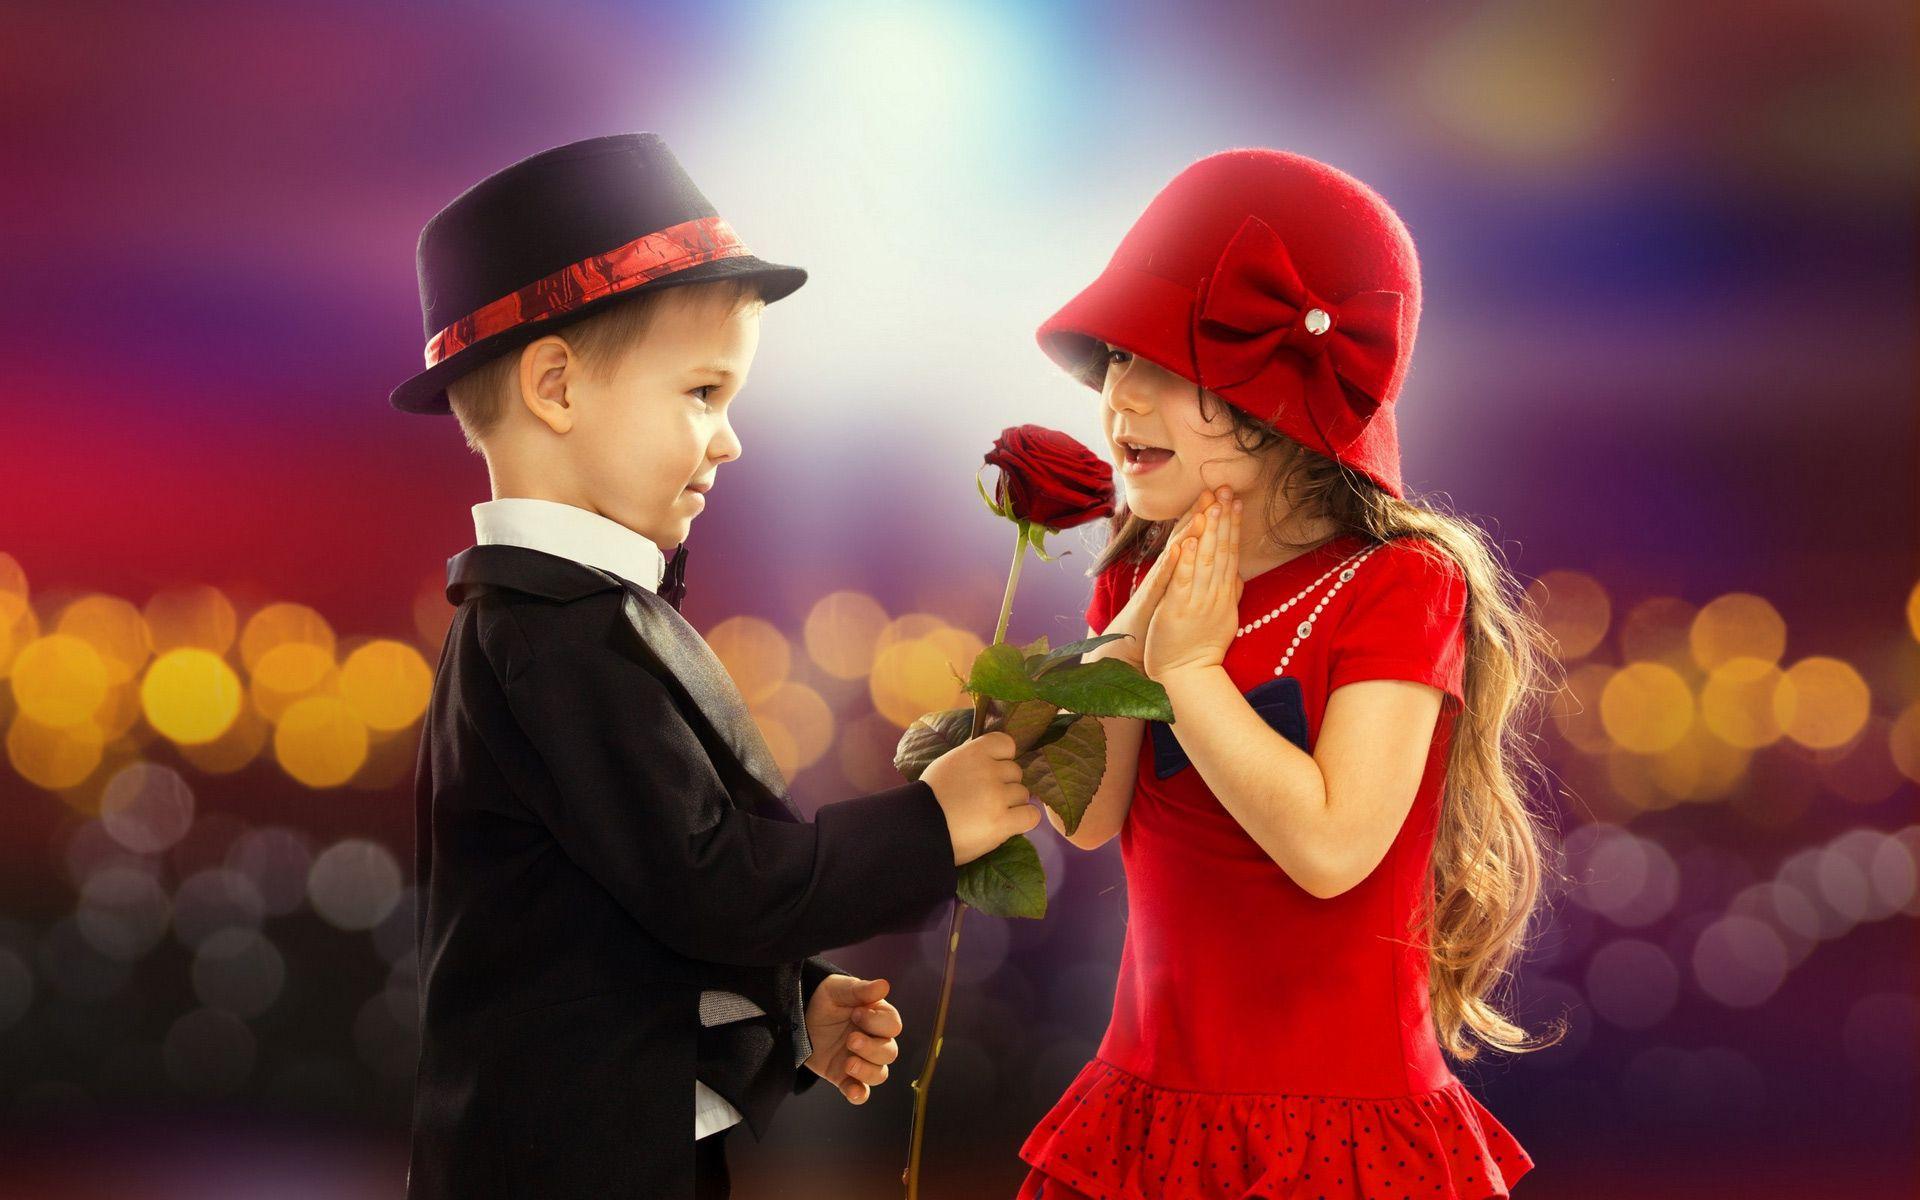 Boy And Girl Wallpapers - Wallpaper Cave